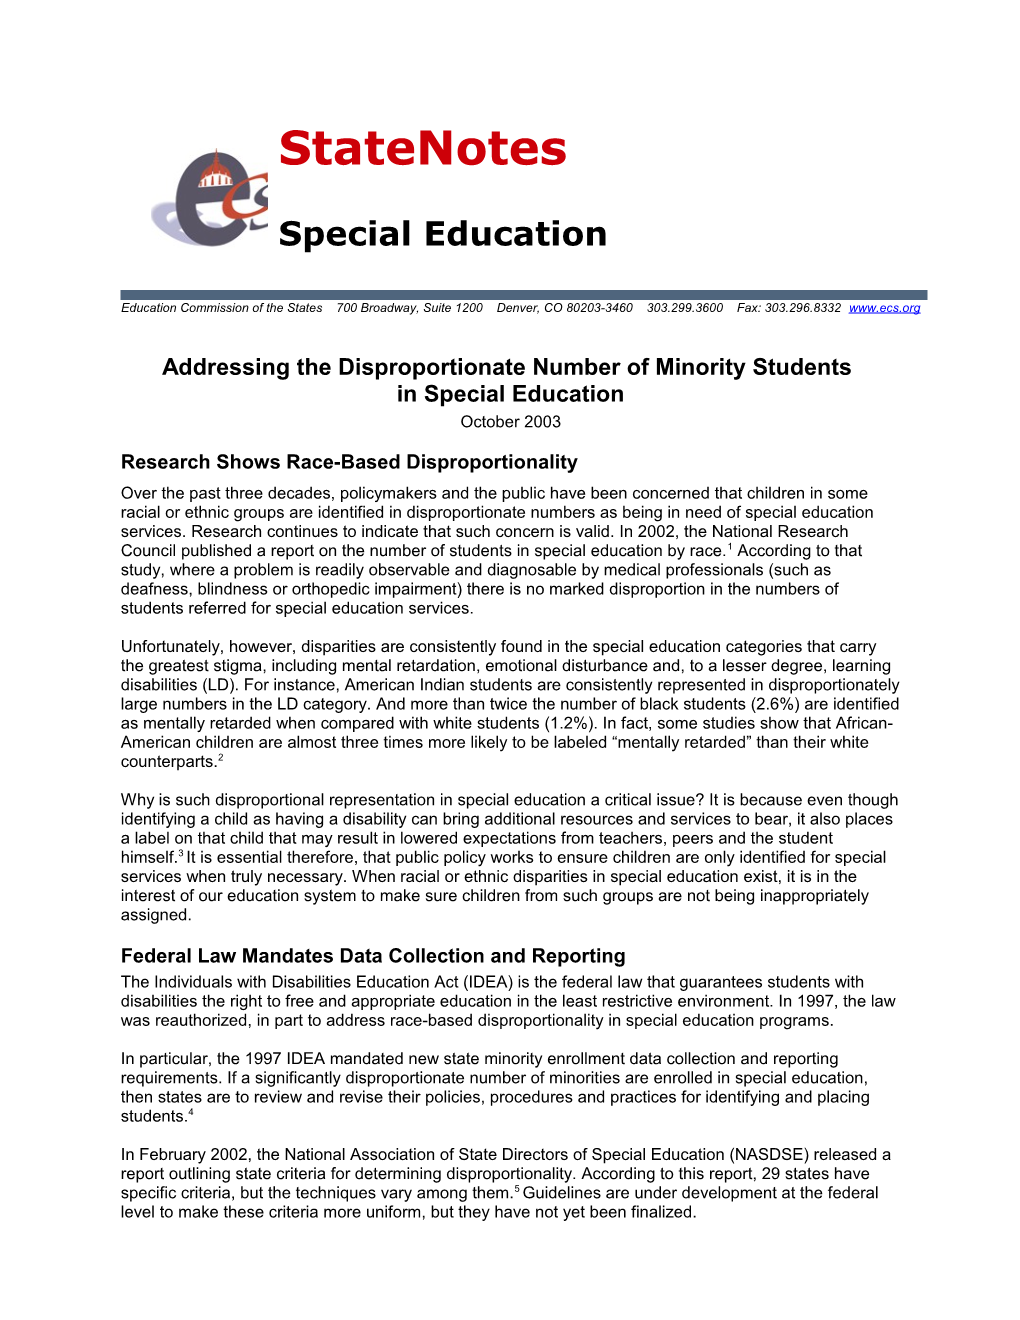 Addressing the Disproportionate Number of Minority Students